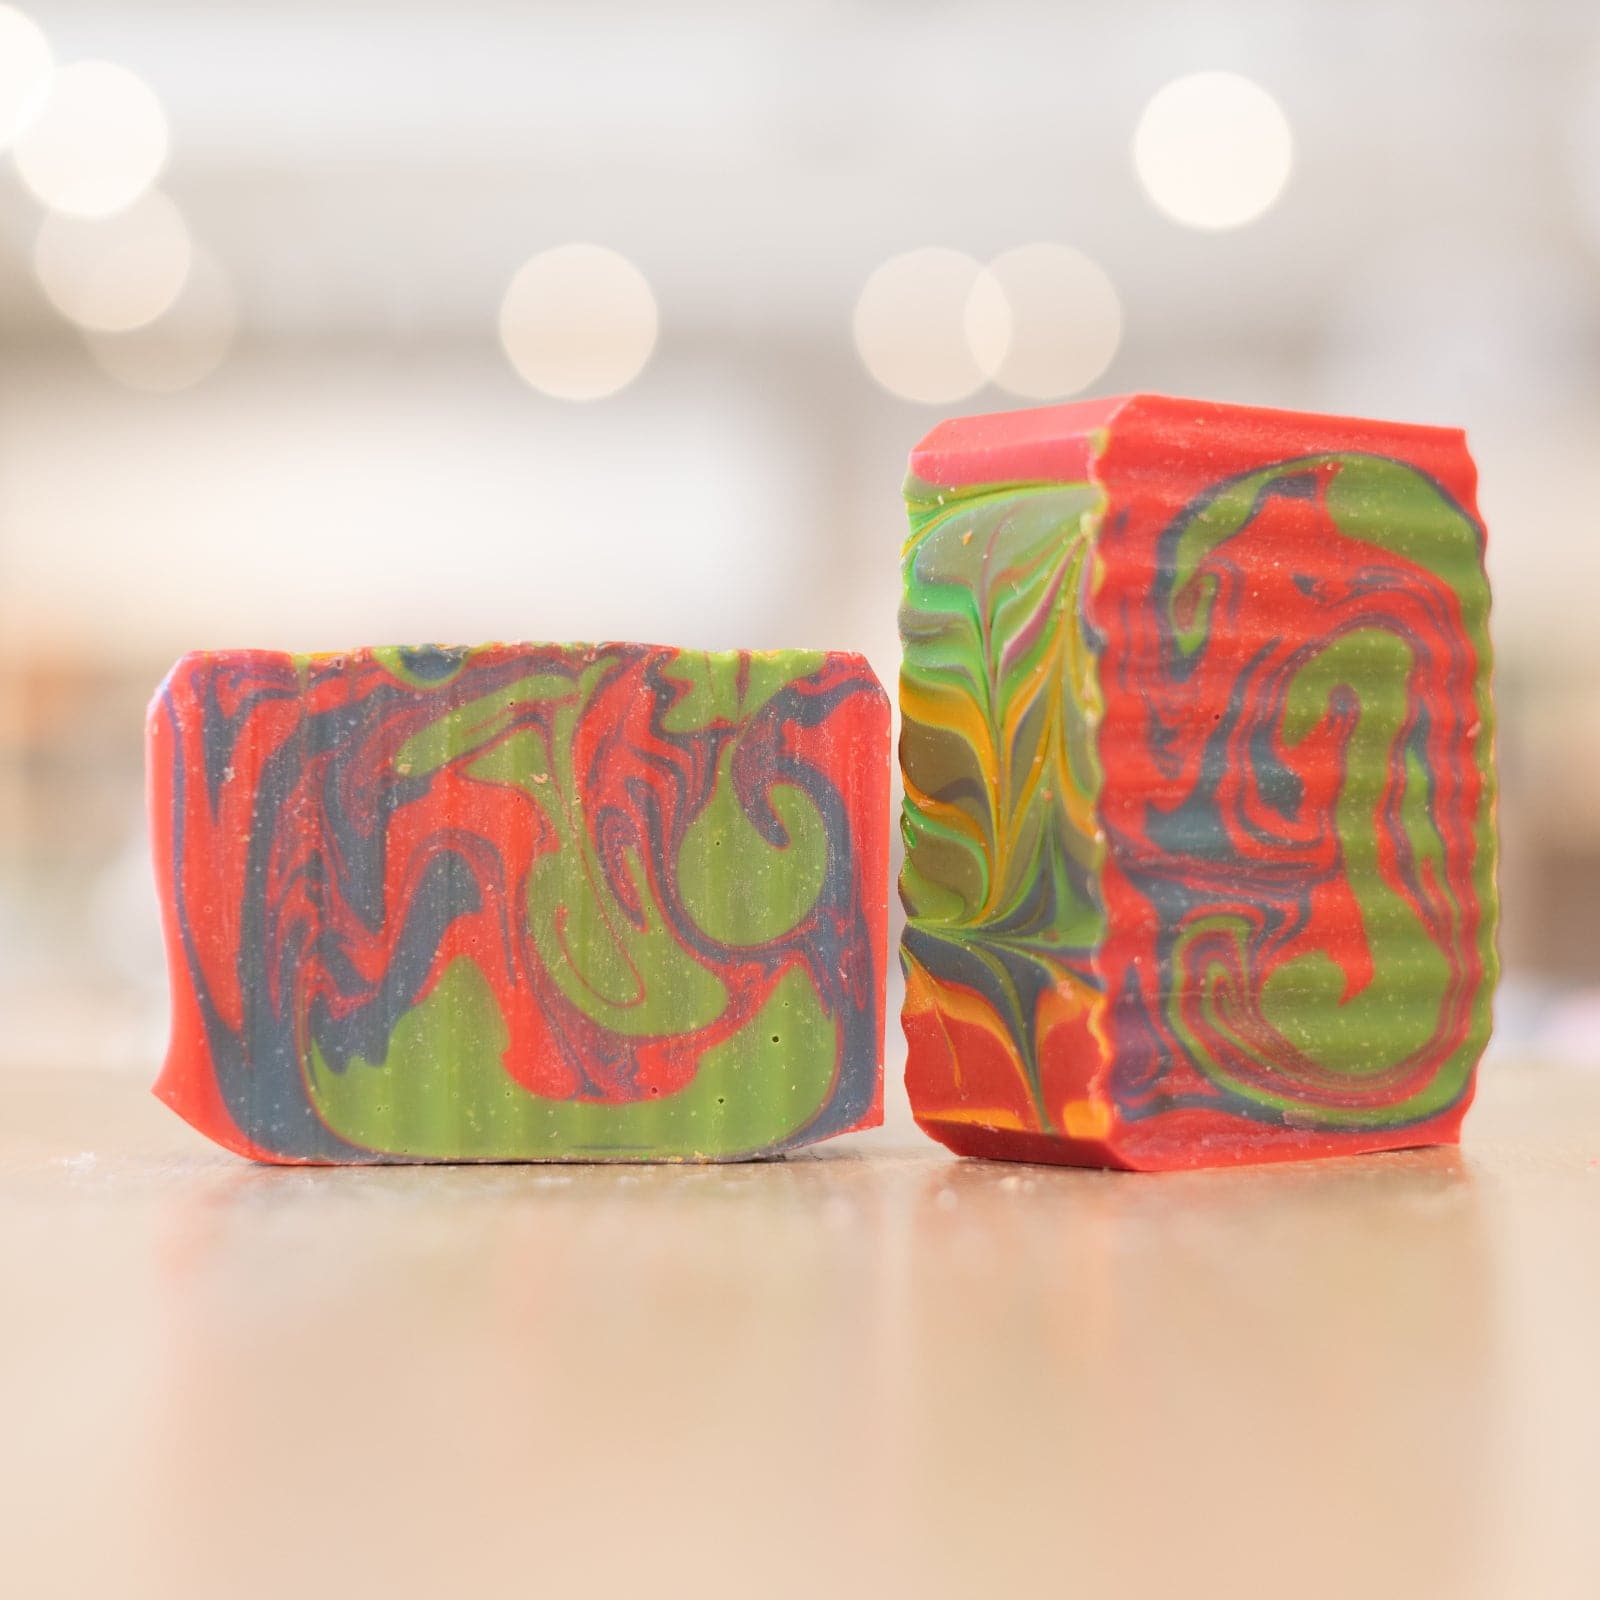 Two Fruity Loopy Soap Bars with multicolor design on wooden counter